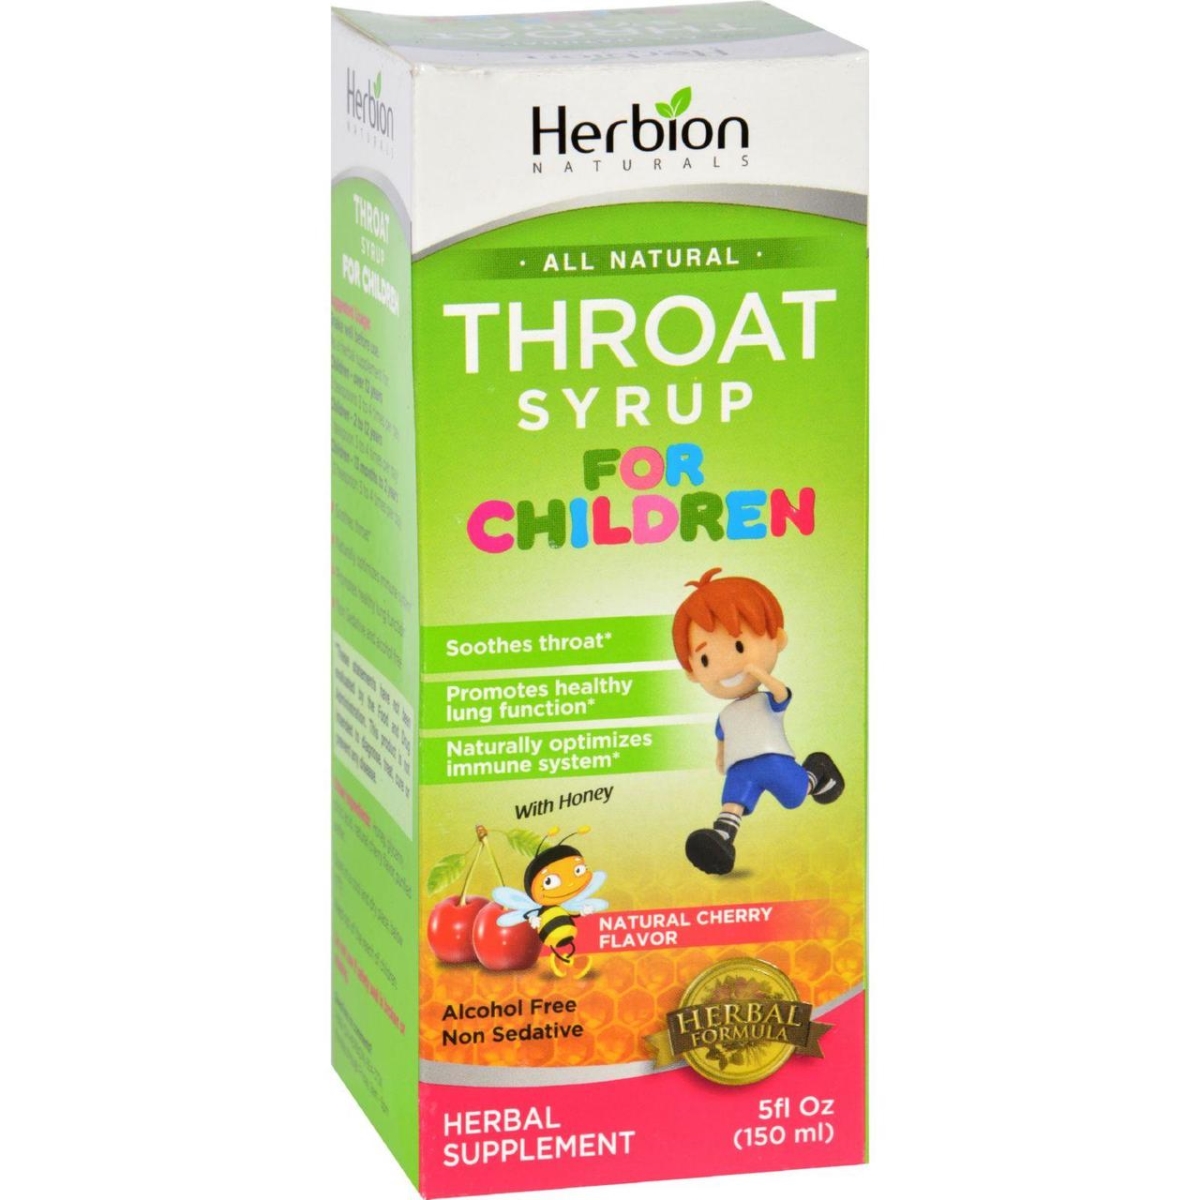 Hg1645035 5 Oz Throat Syrup - All Natural Cherry For Children